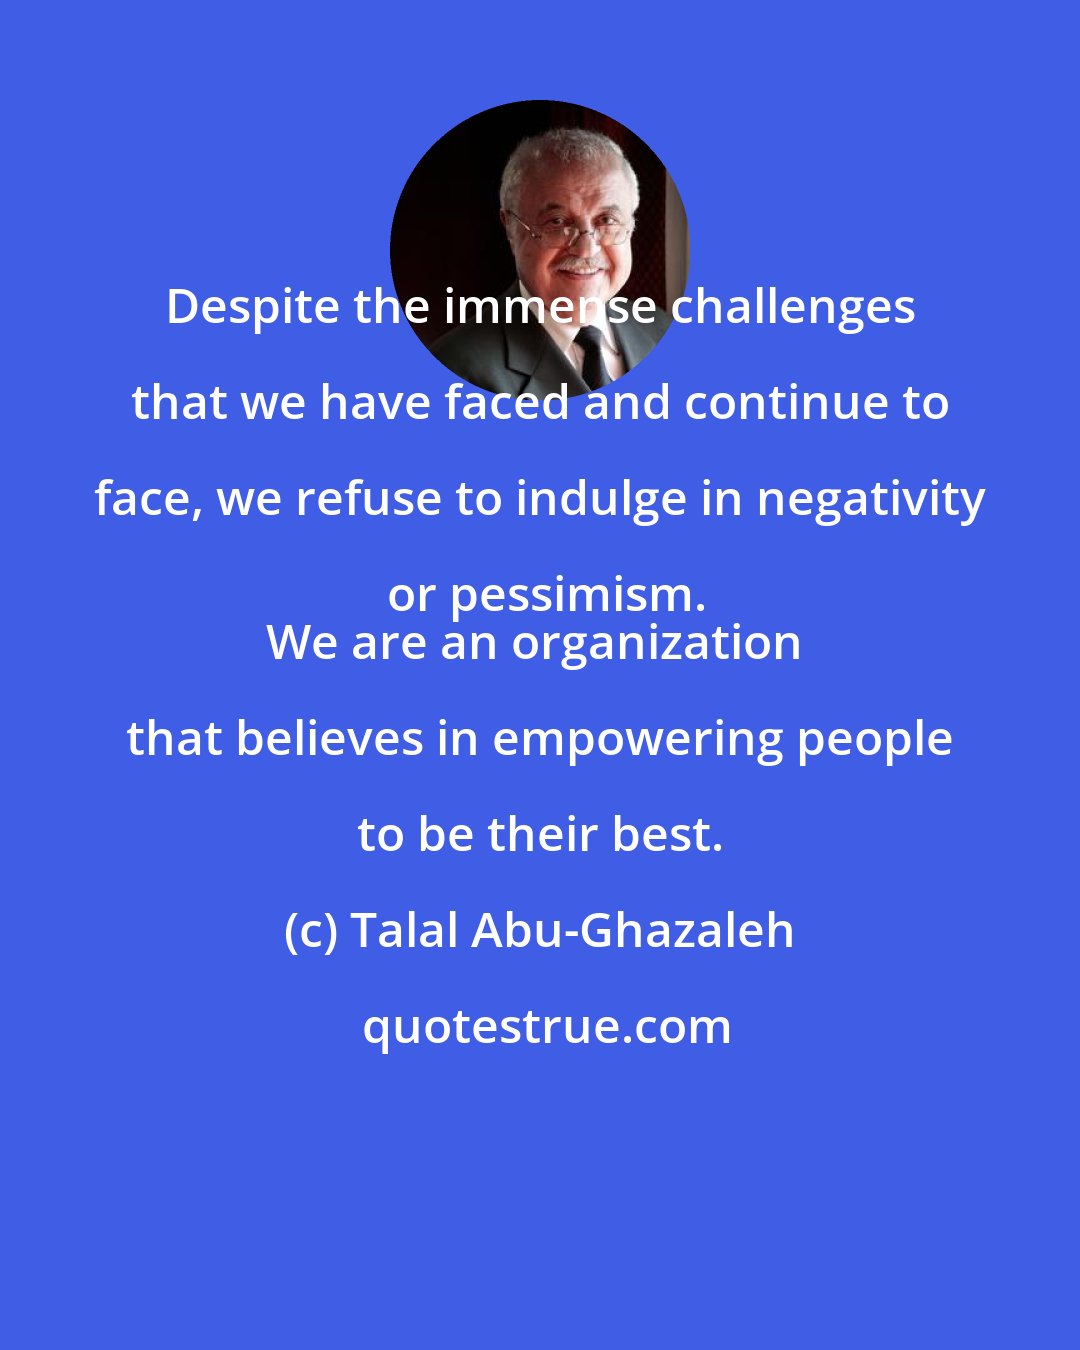 Talal Abu-Ghazaleh: Despite the immense challenges that we have faced and continue to face, we refuse to indulge in negativity or pessimism.
We are an organization that believes in empowering people to be their best.